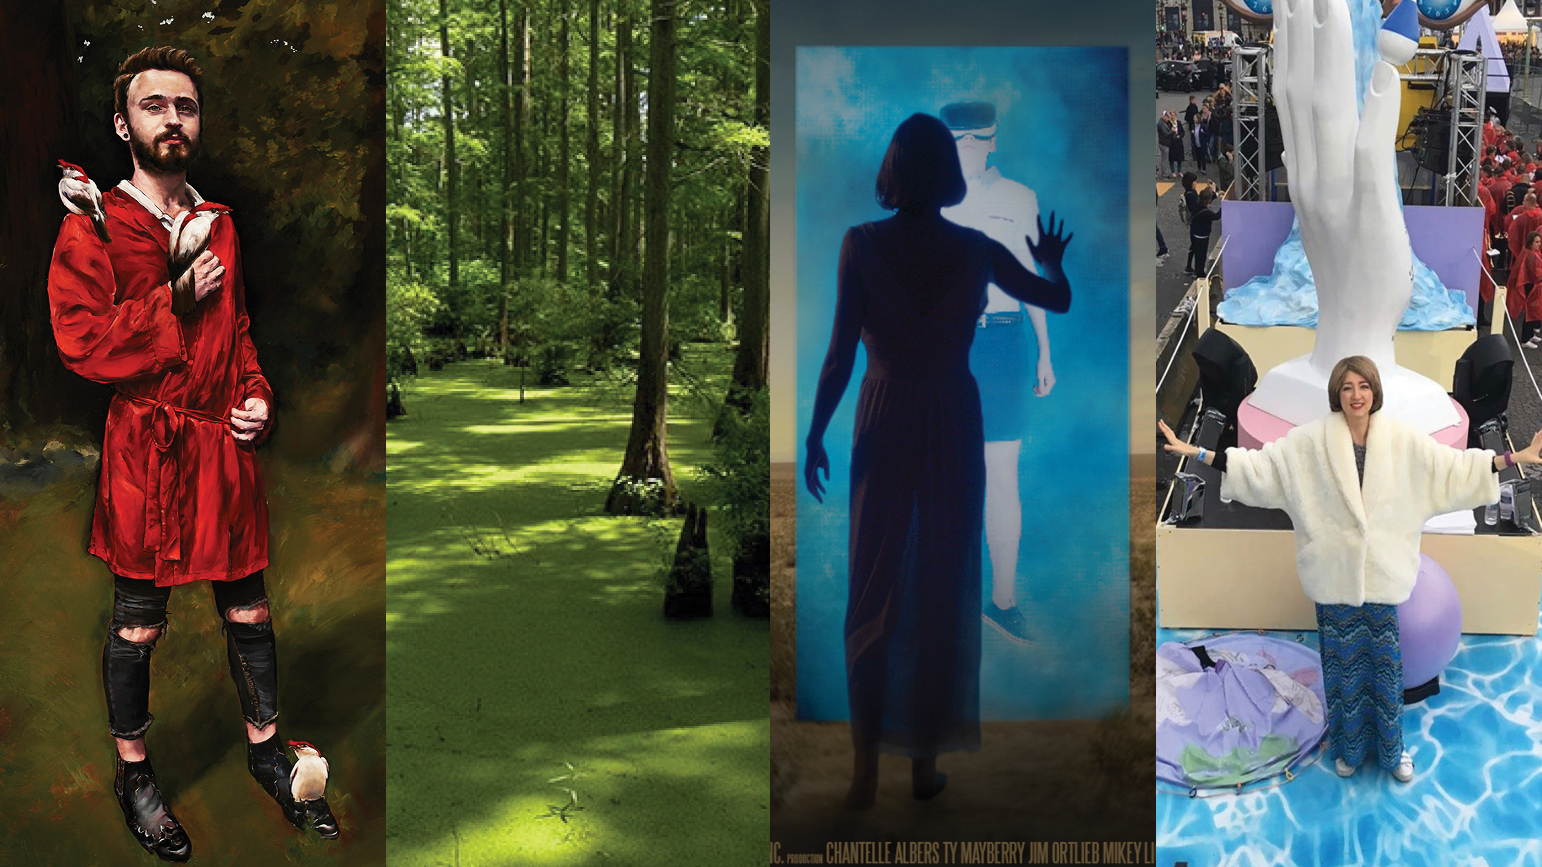 Four images: 1) painting of a young man; 2) photograph of a forest; 3) silhouette of a woman in front of a door; 4) woman on a parade float with her arms outstretched